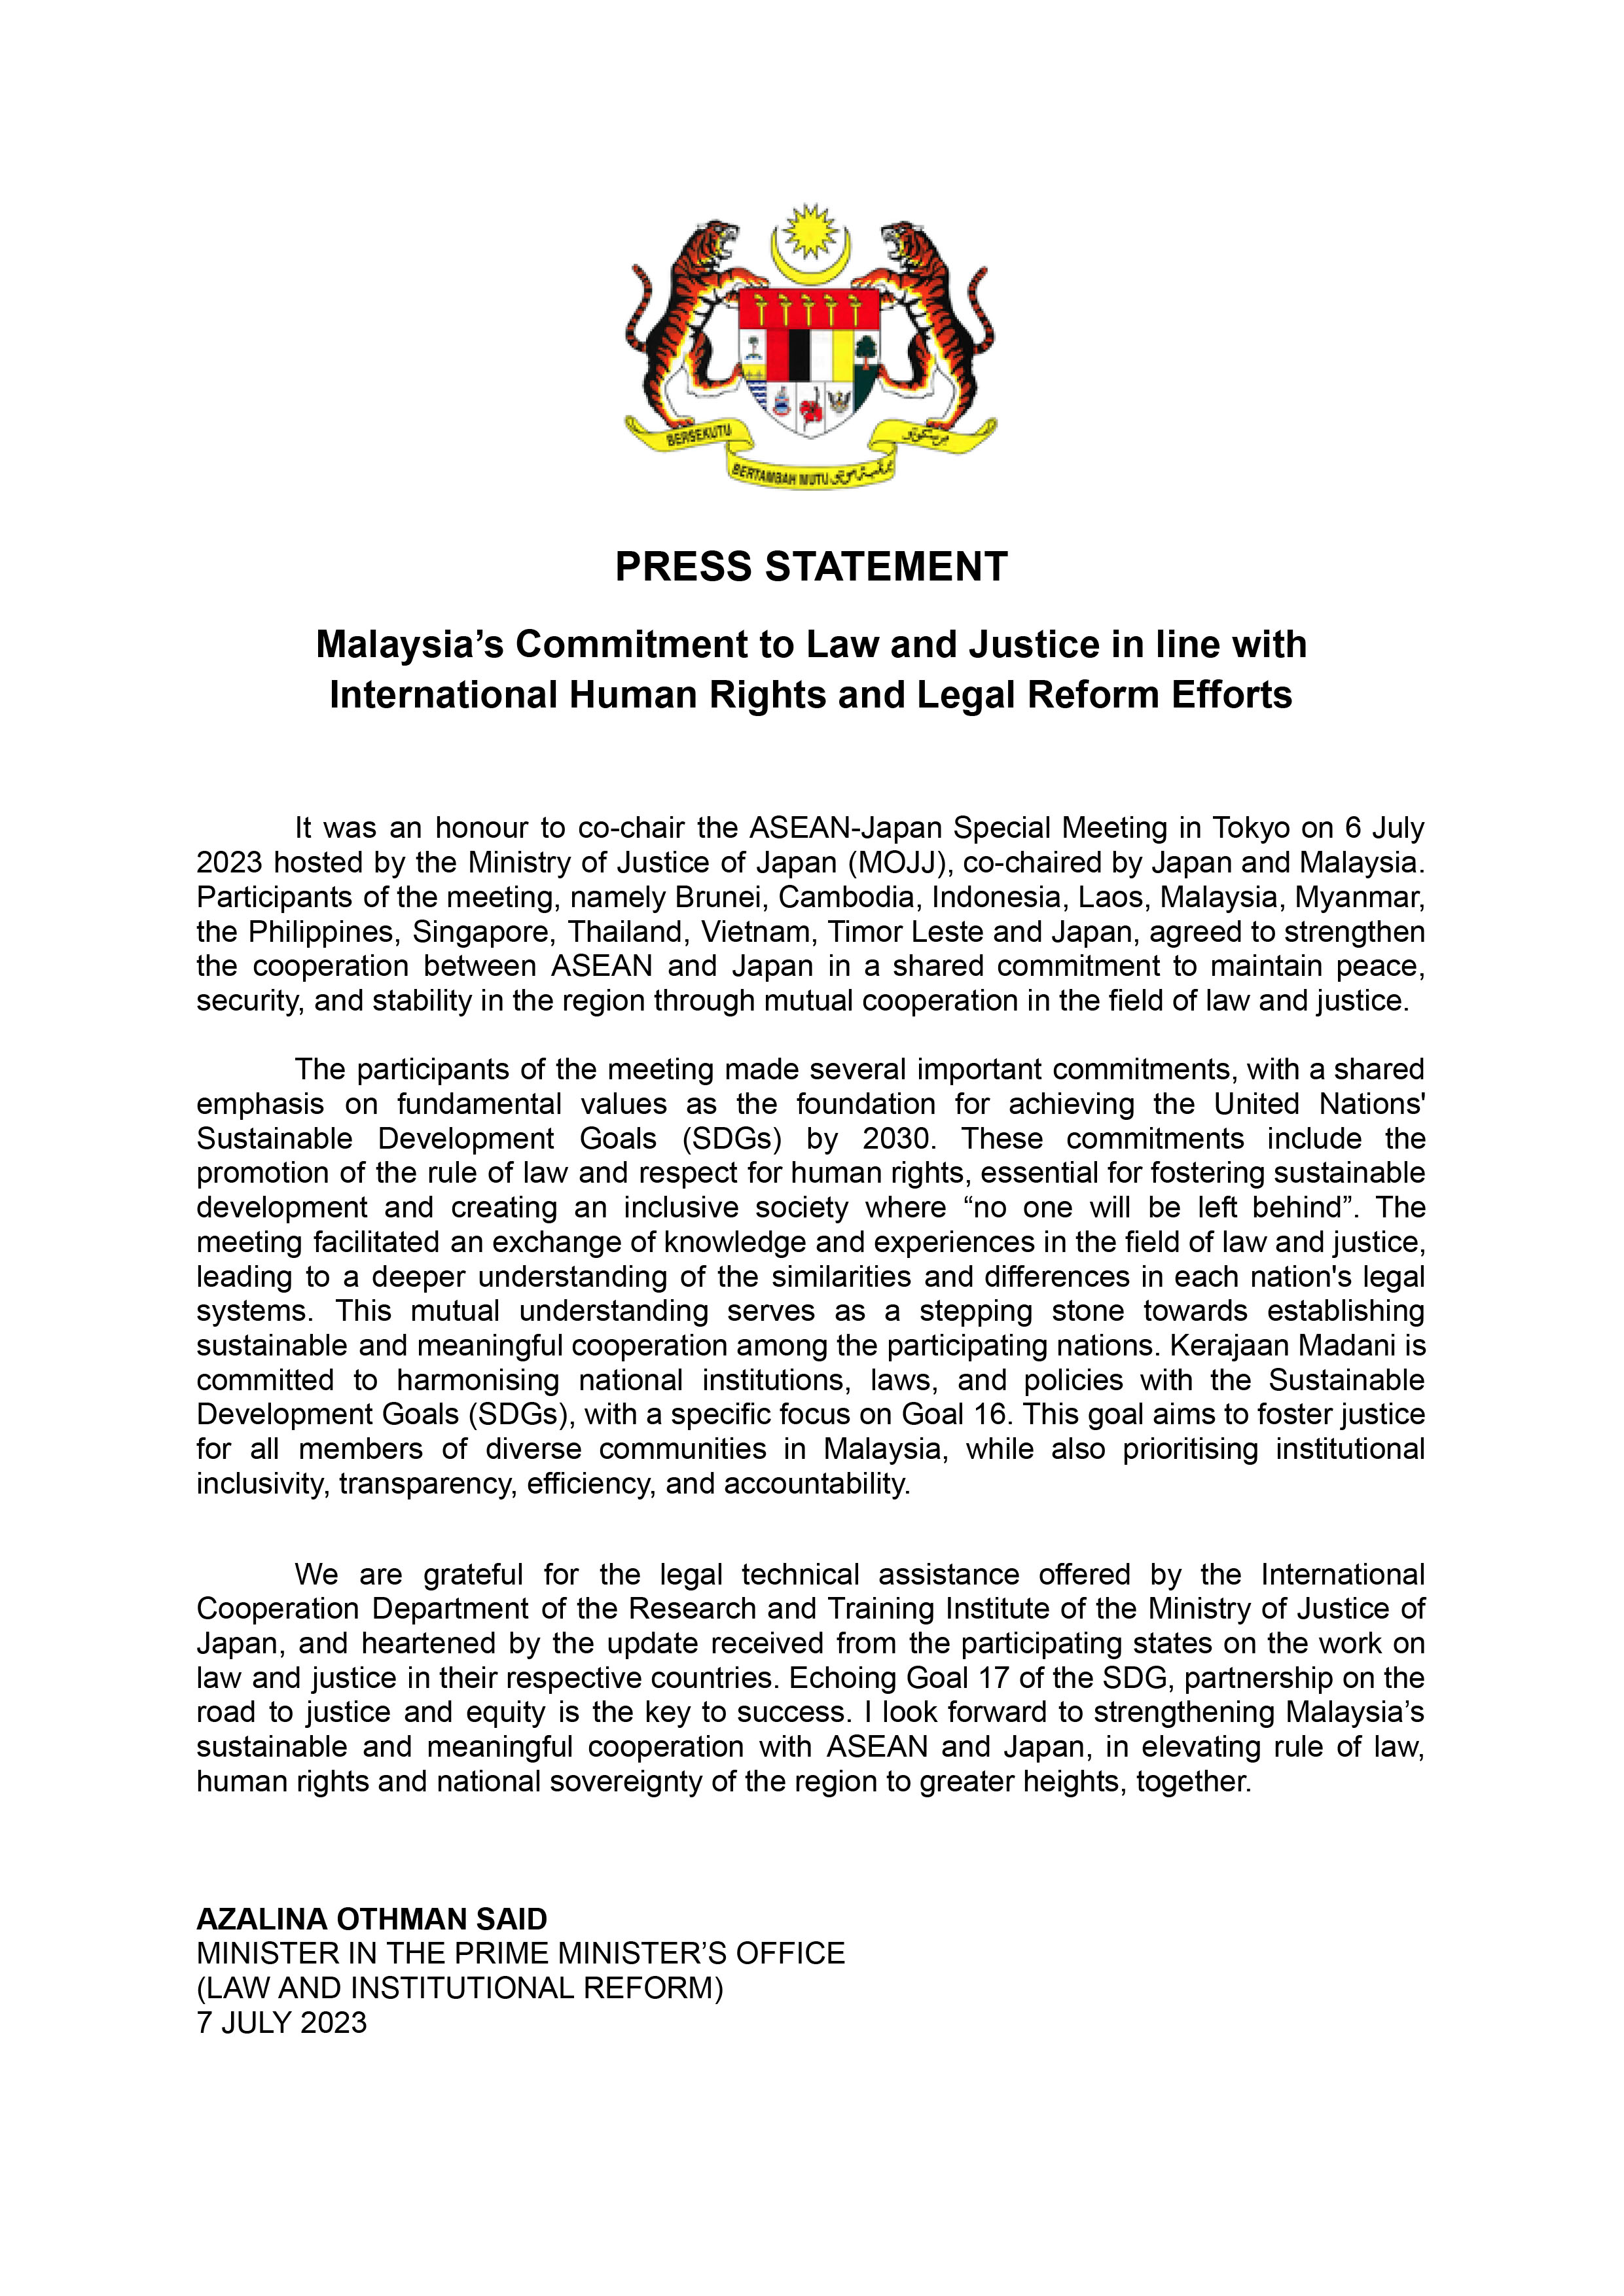 Press Statement   Malaysia’s Commitment to Law and Justice in line with International Efforts